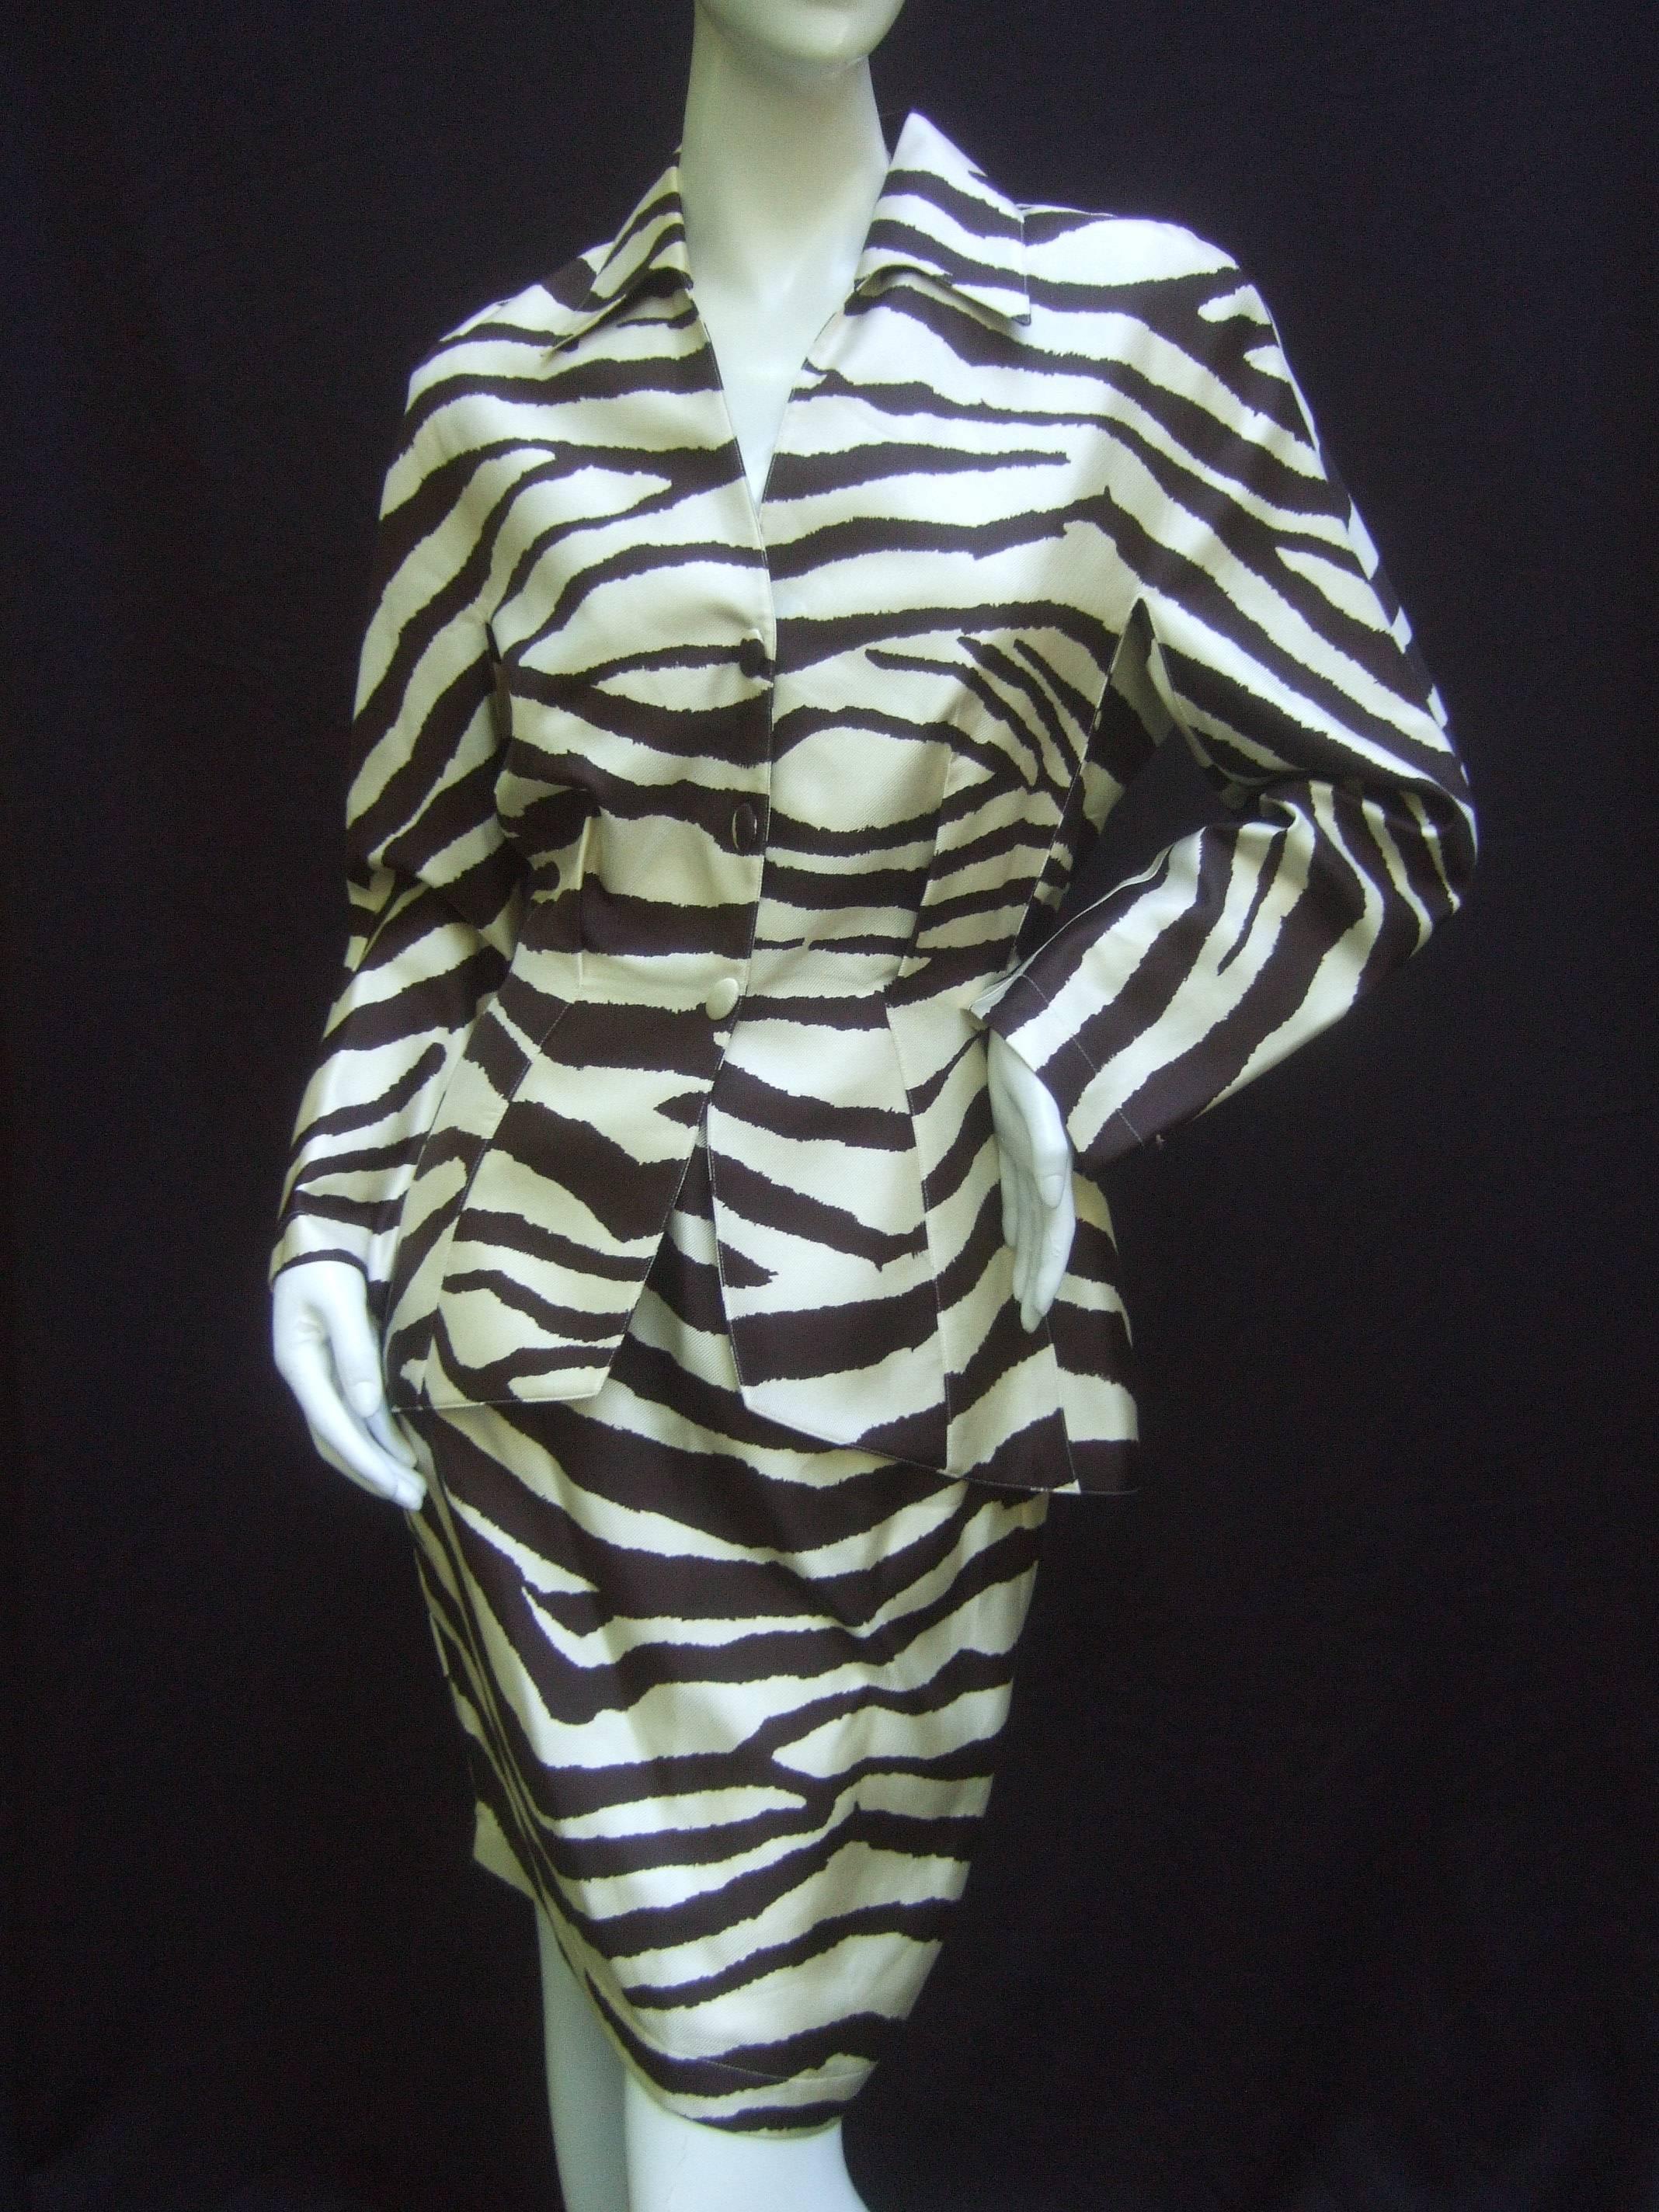 Fabulous Mugler animal print silk suit. Labelled size 40 EU (US 8)
100% silk with silk lining. The sharply tailored jacket closes with fabric covered oval snaps. An iconic piece from the 1990's. Excellent Condition.
Labelled Thierry Mugler. Made